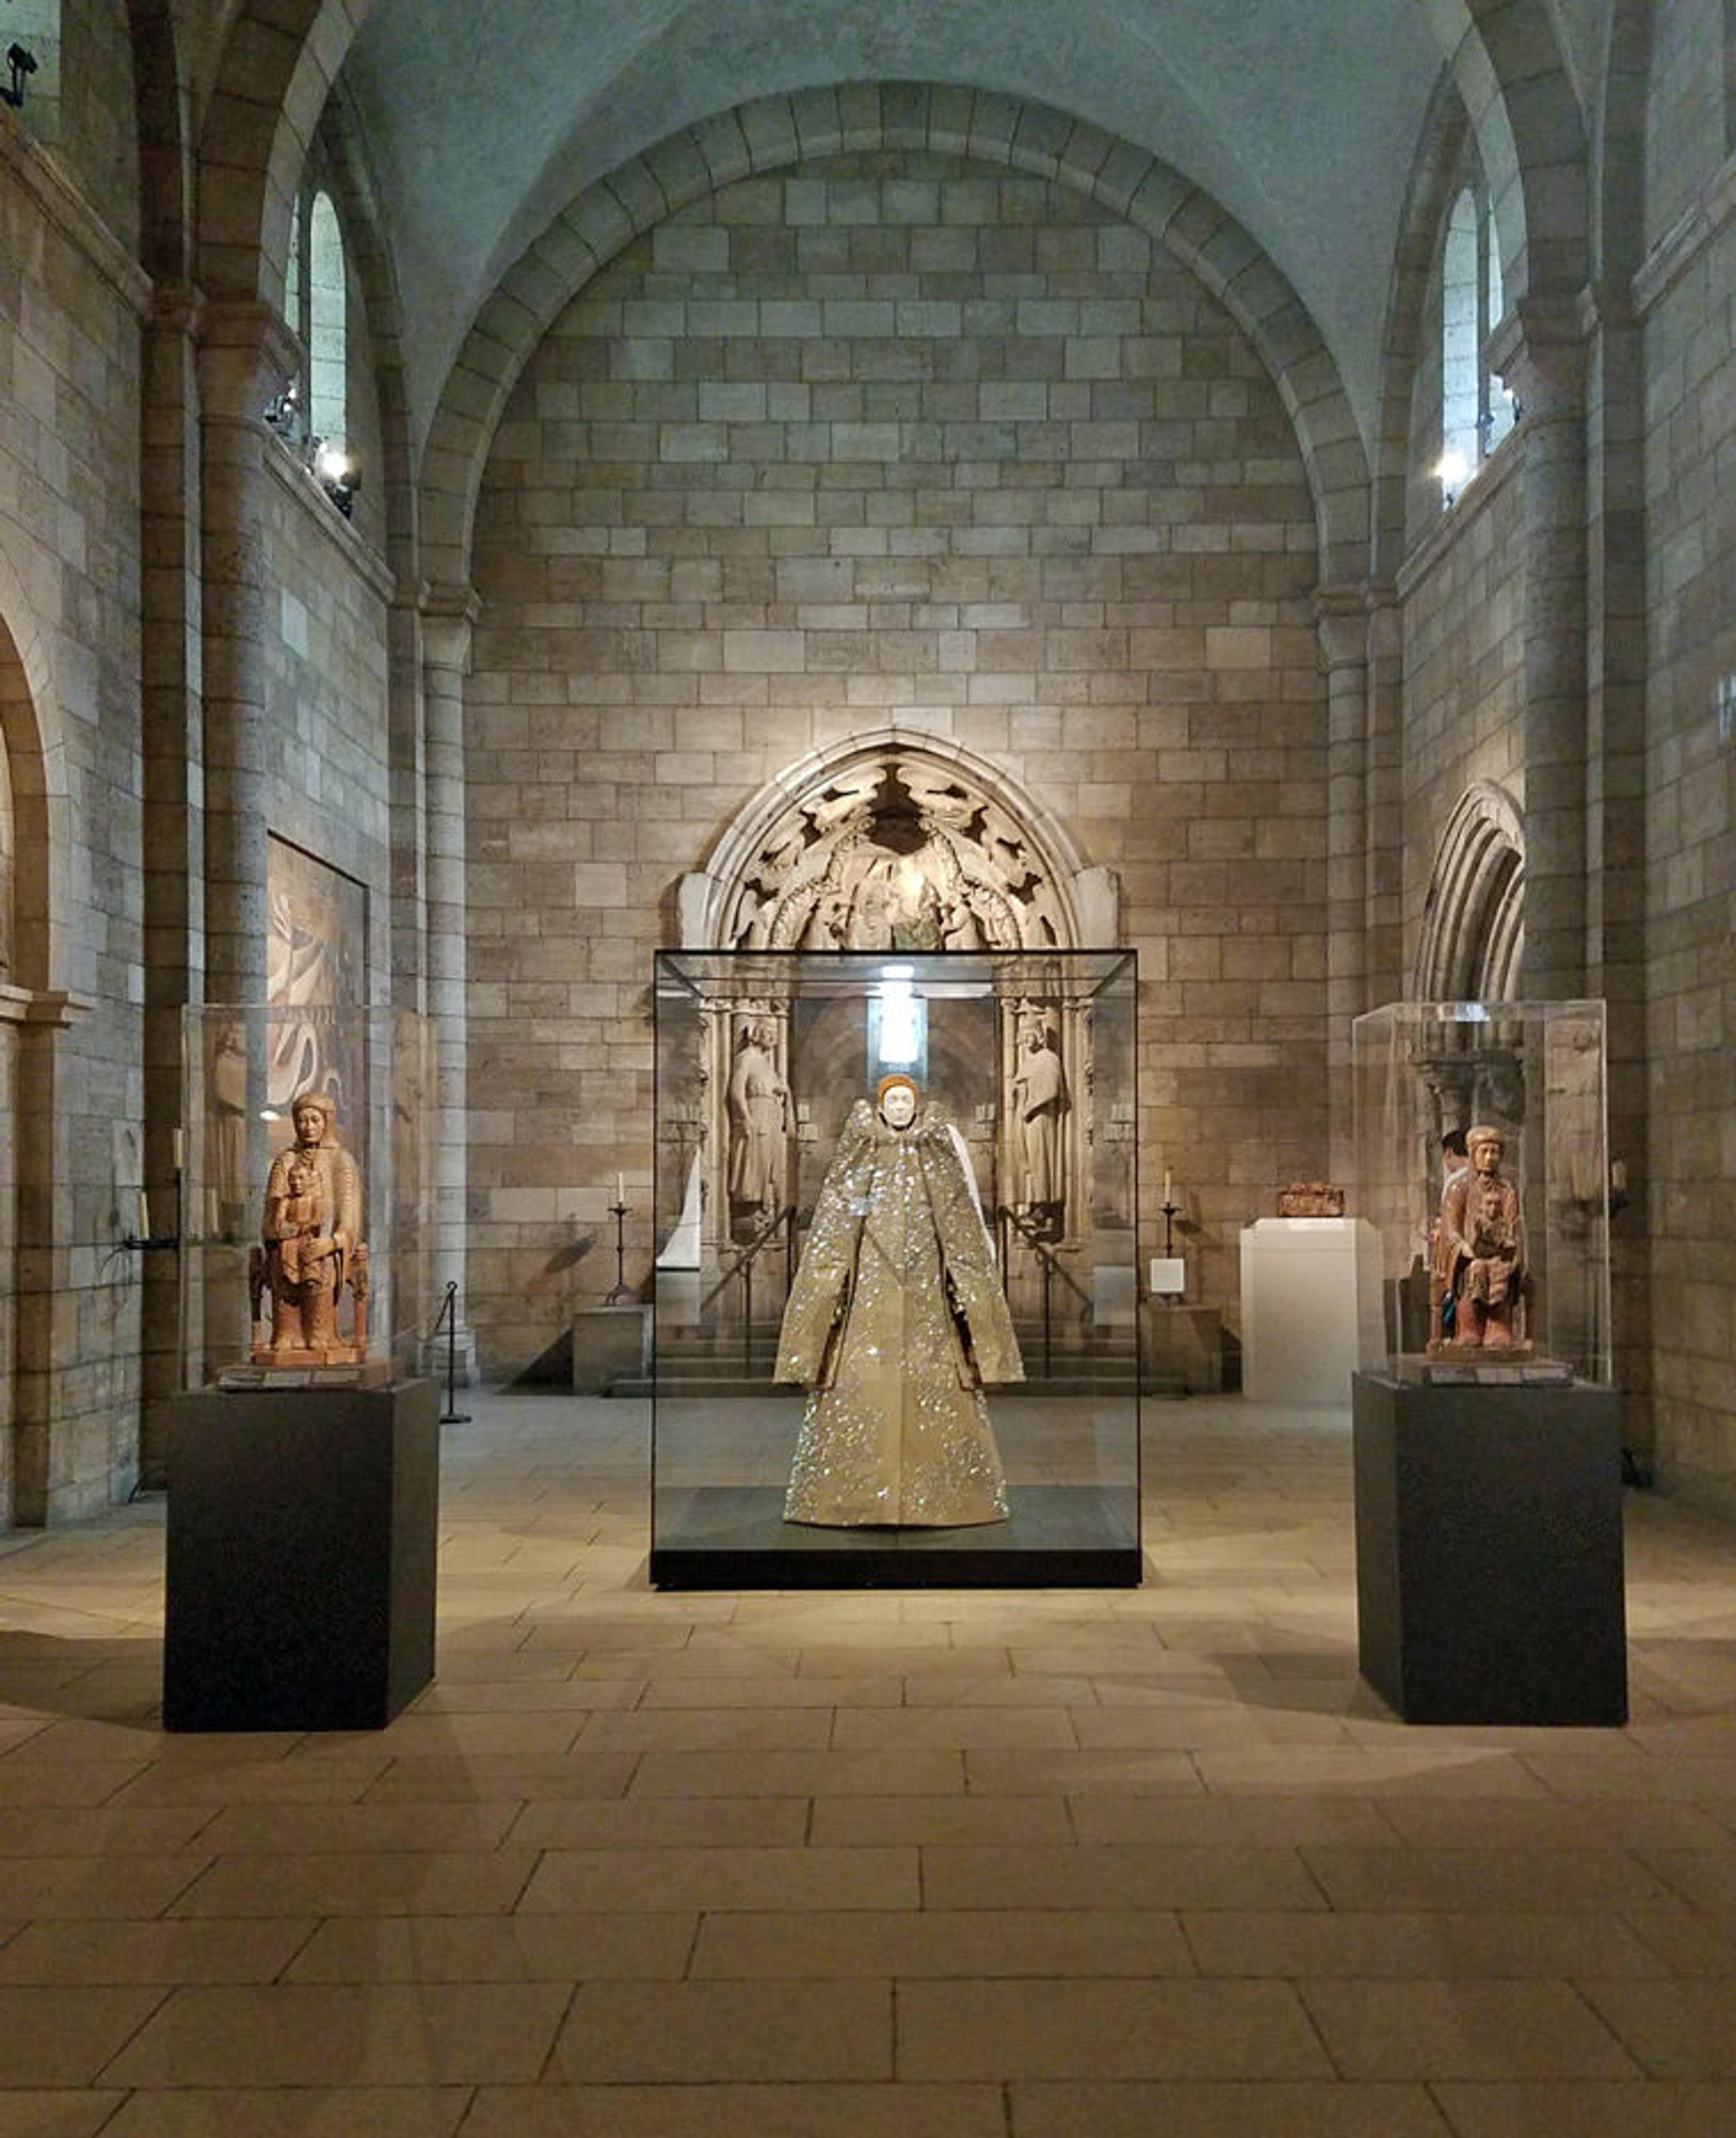 View of a gallery in a medieval cloister, featuring two twelfth-century sculptures of the Virgin and Child on either side of a contemporary ensemble by Viktor & Rolf